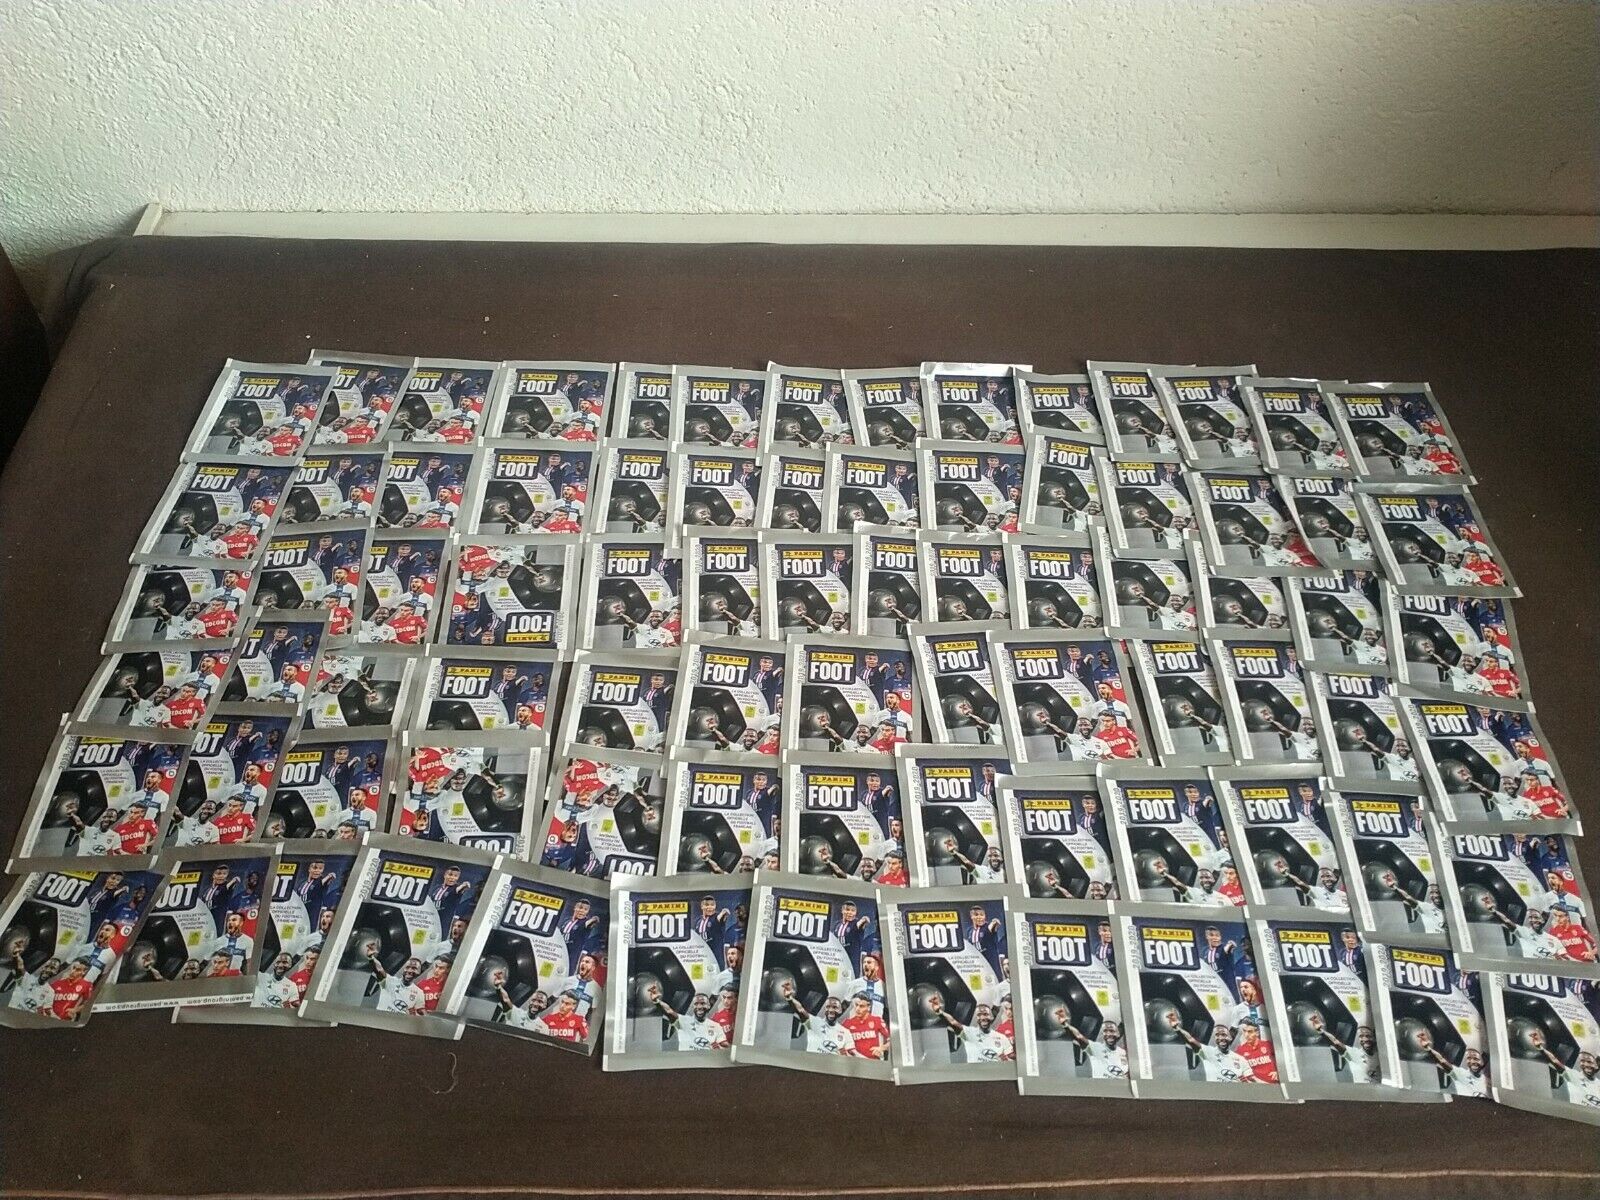 2020 Panini Football Sealed Packs 83 Packs Pictures Liv. Offered